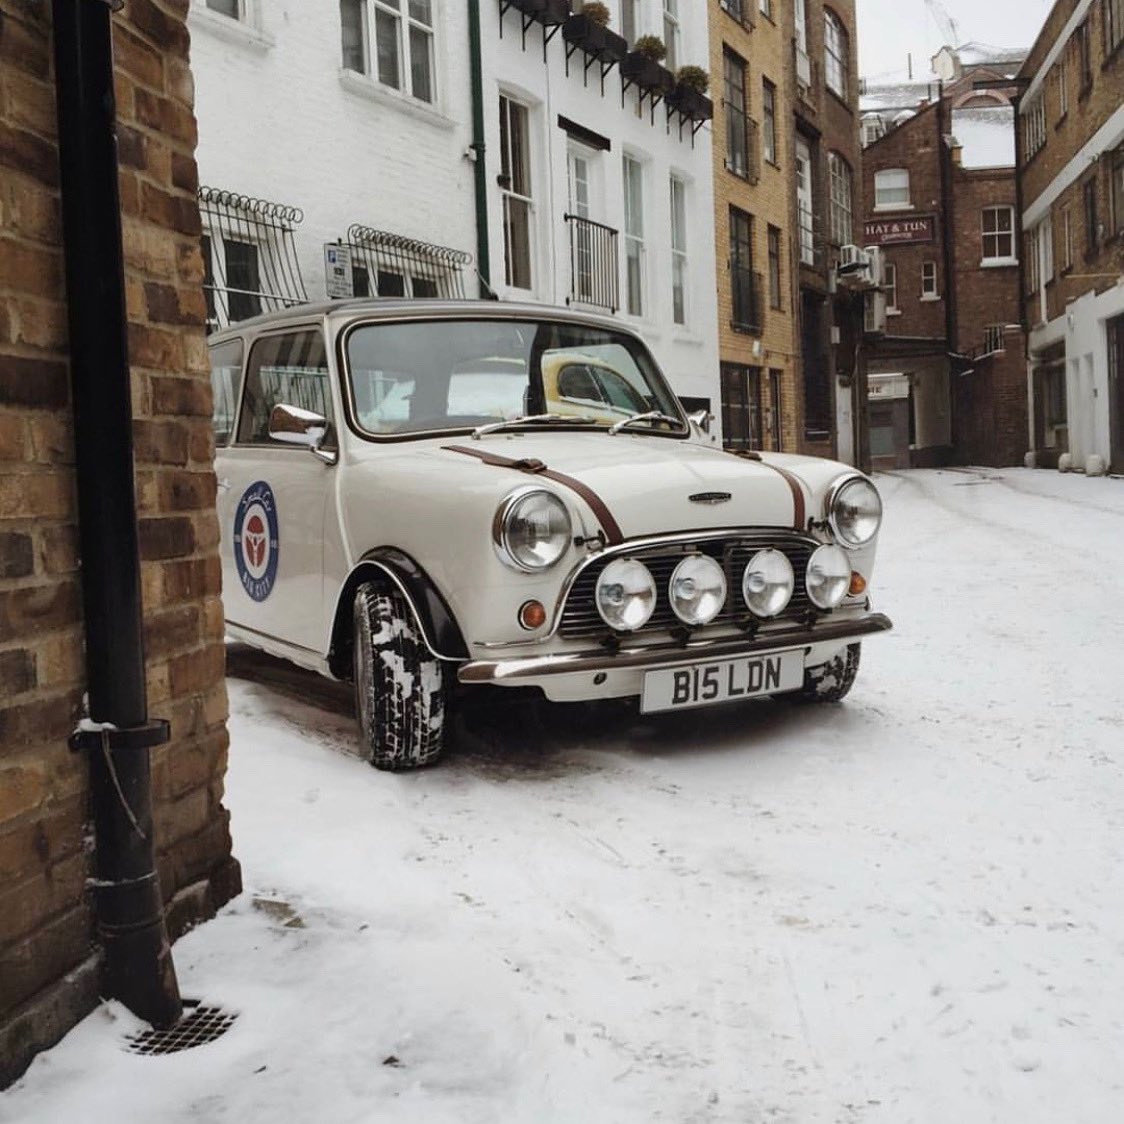 Christmas is all about seeing family, indulging in your favorite foods and falling asleep before the 18:00 news. However, what we are really hoping for this year is to be blessed with a white Christmas so we can pretend that we are Paddy Hopkirk.
#WhiteChristmas #PaddyHopkirk